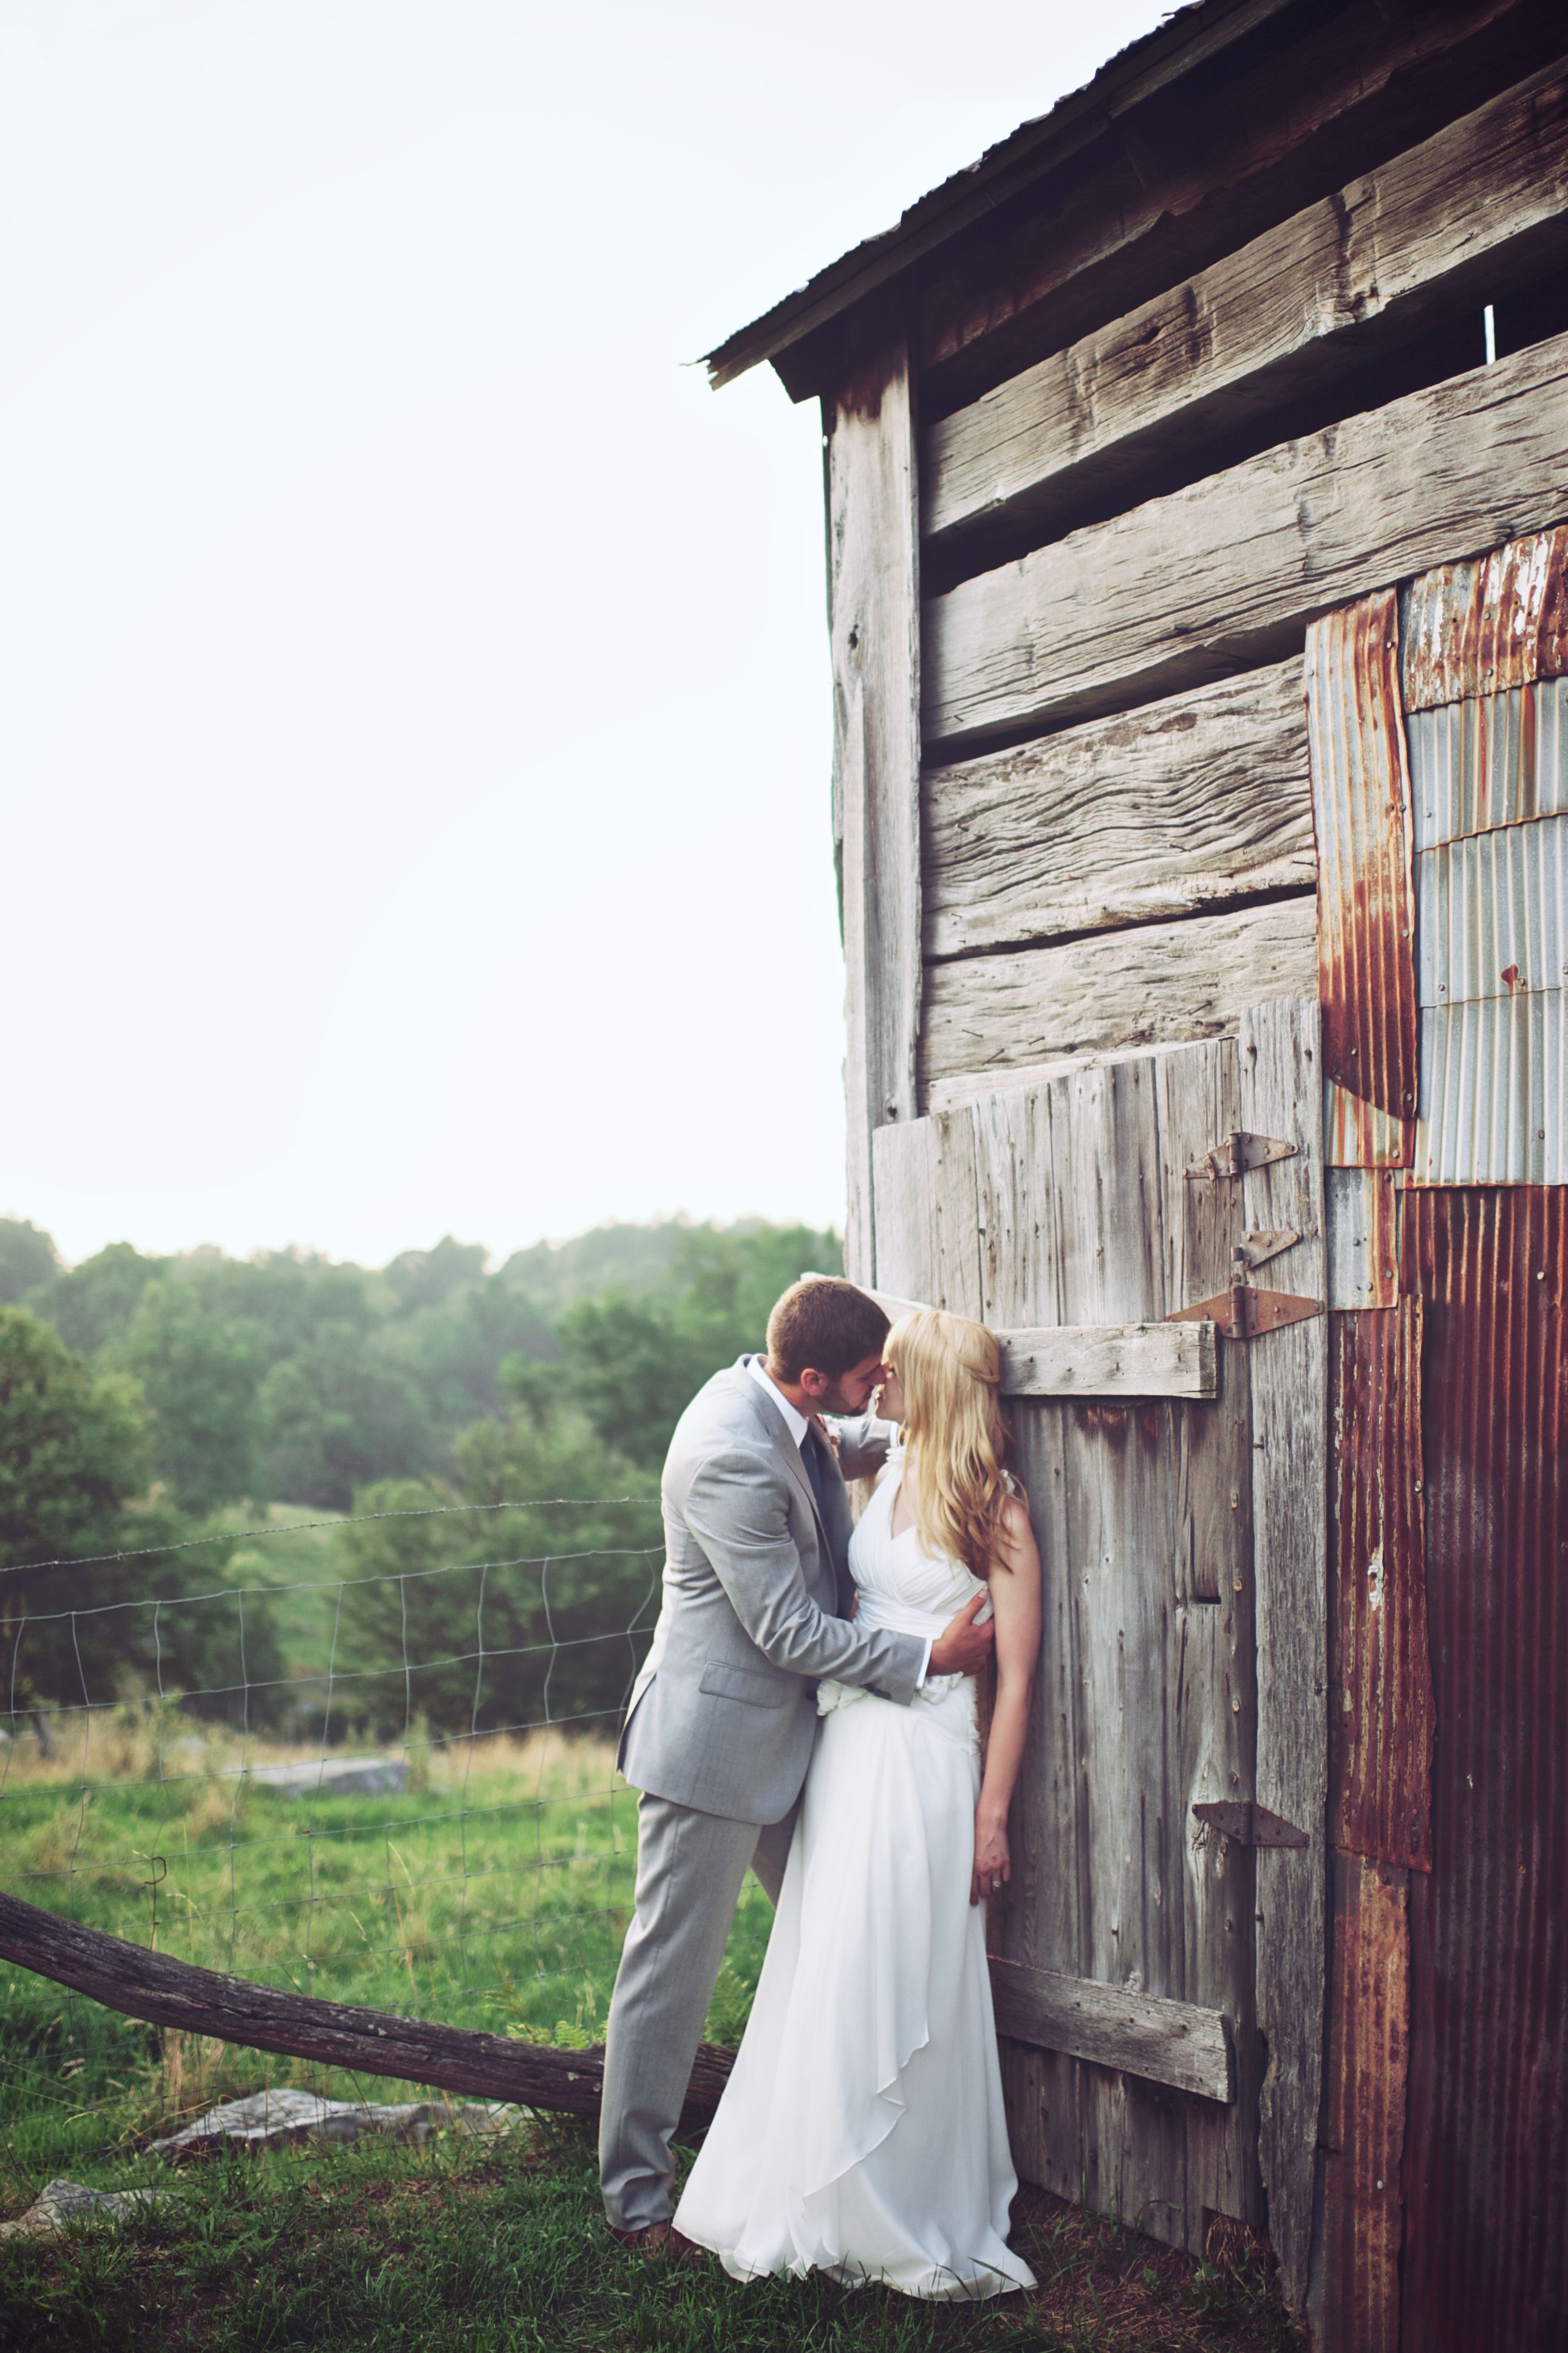 Bride and groom, wedding photography, country wedding pictures, vintage wedding